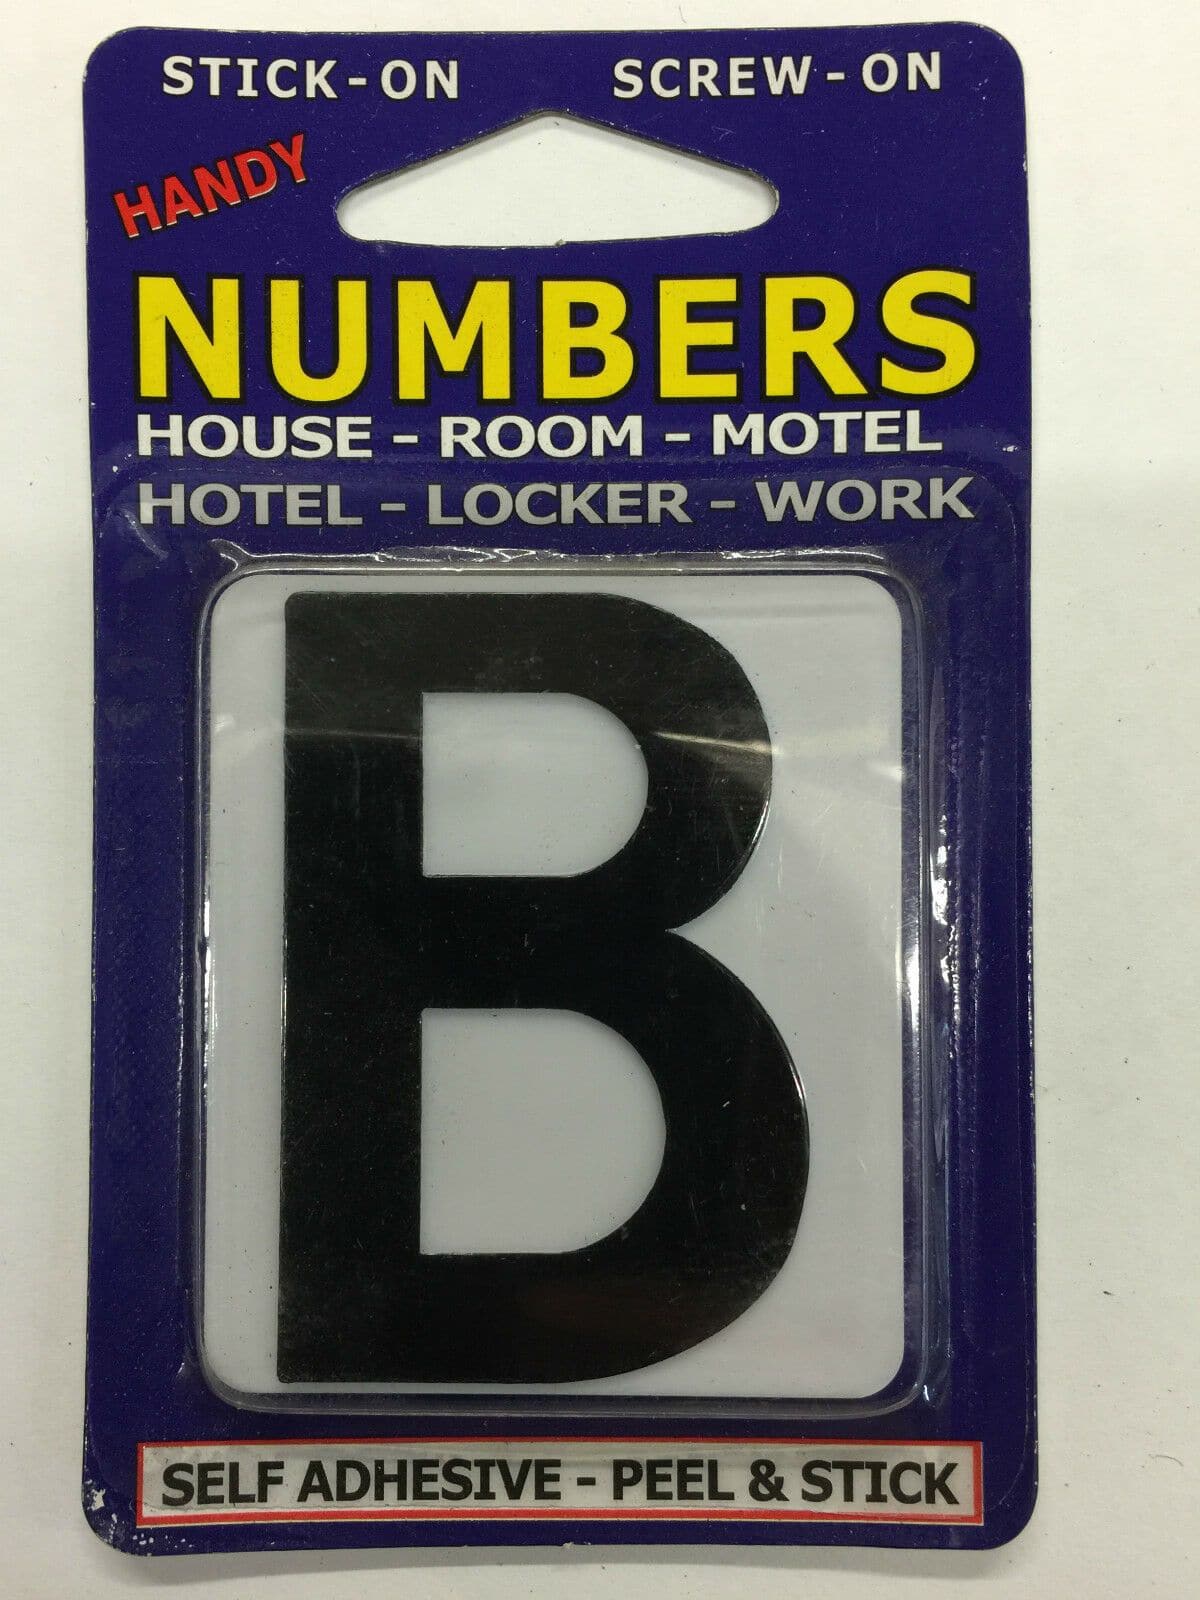 Handy Adhesive Letters Sign For House Room Locker Work 55x50x2mm WHBB - Double Bay Hardware